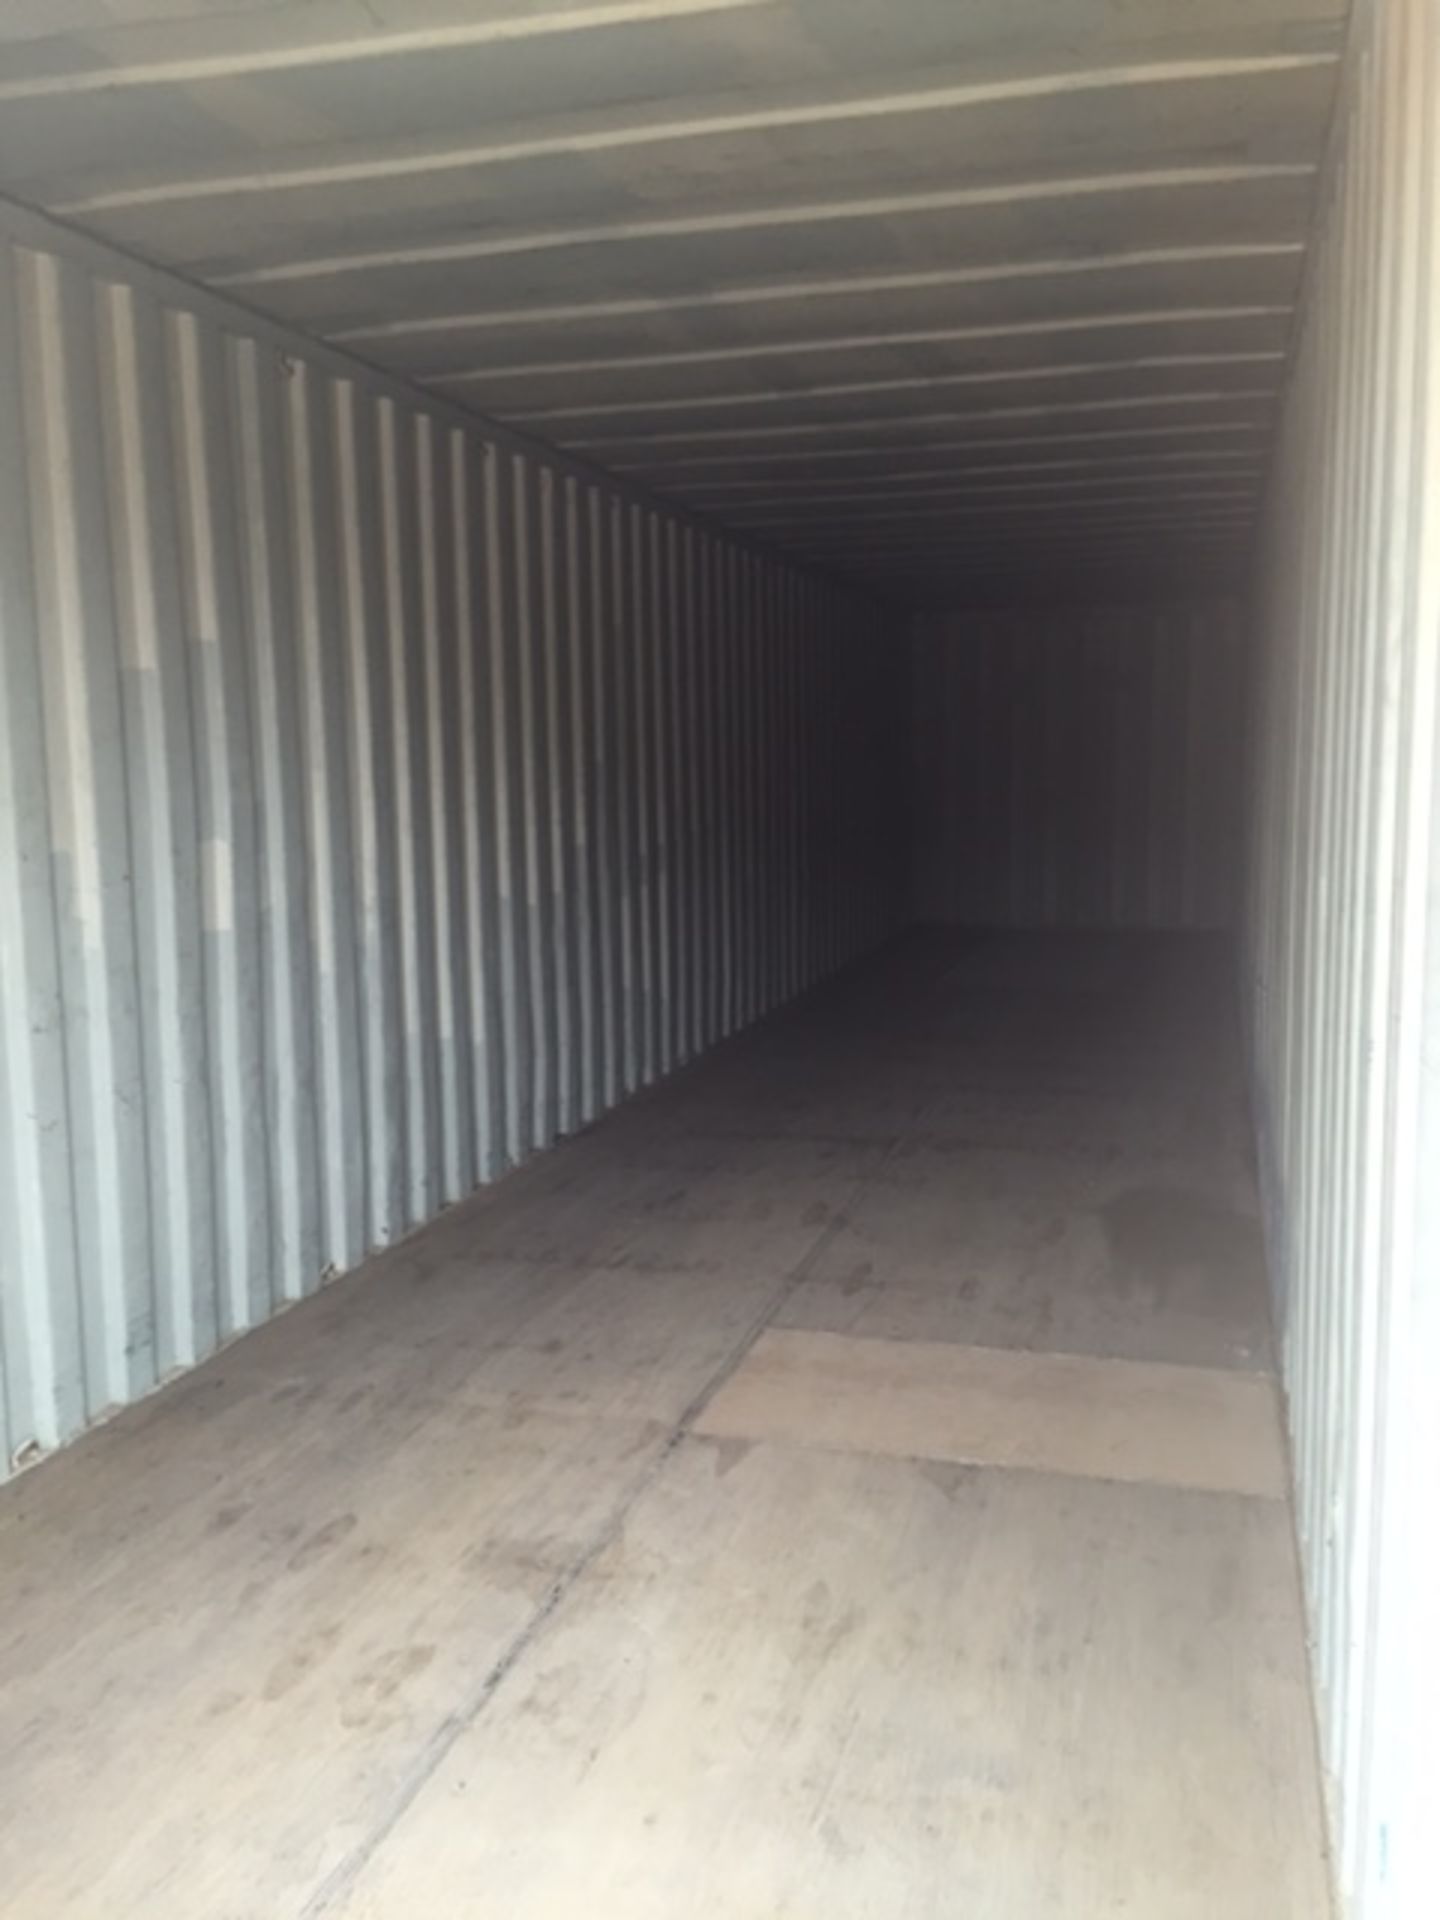 STEEL STORAGE CONTAINER, 40' X 90' X 8', reconditioned floor, Unit BSSL4447179 - Image 3 of 3